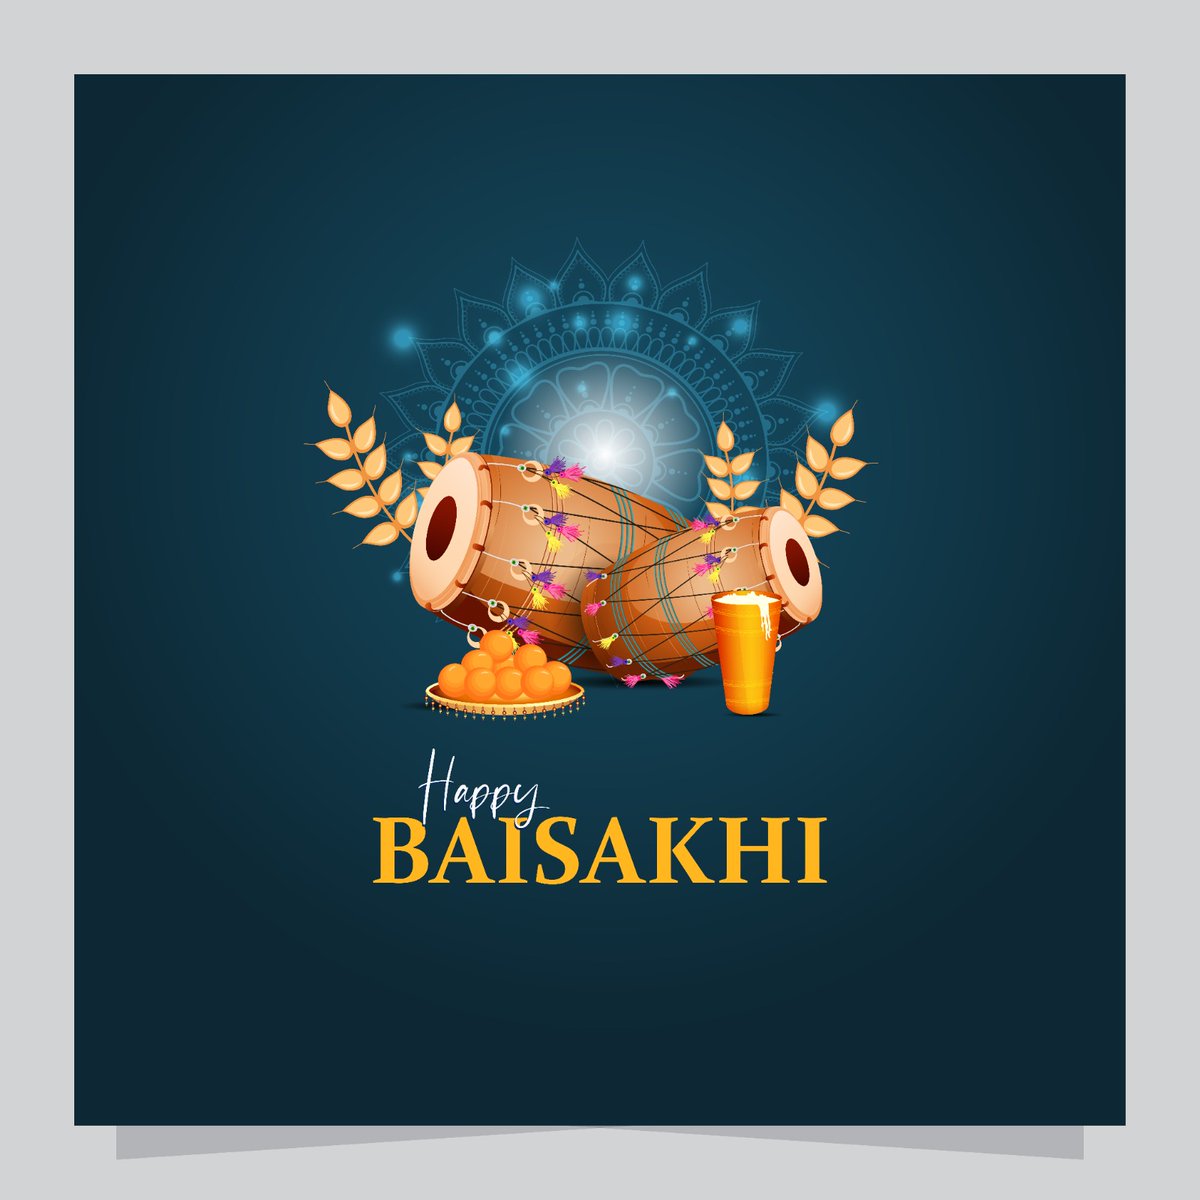 Happy Baisakhi! Let's celebrate the harvest festival by embracing cleanliness and renewing our commitment to a Swachh Bharat. Just as we reap the fruits of our labour in the fields, let's sow the seeds of a cleaner, greener India for generations to come. #Baisakhi2024